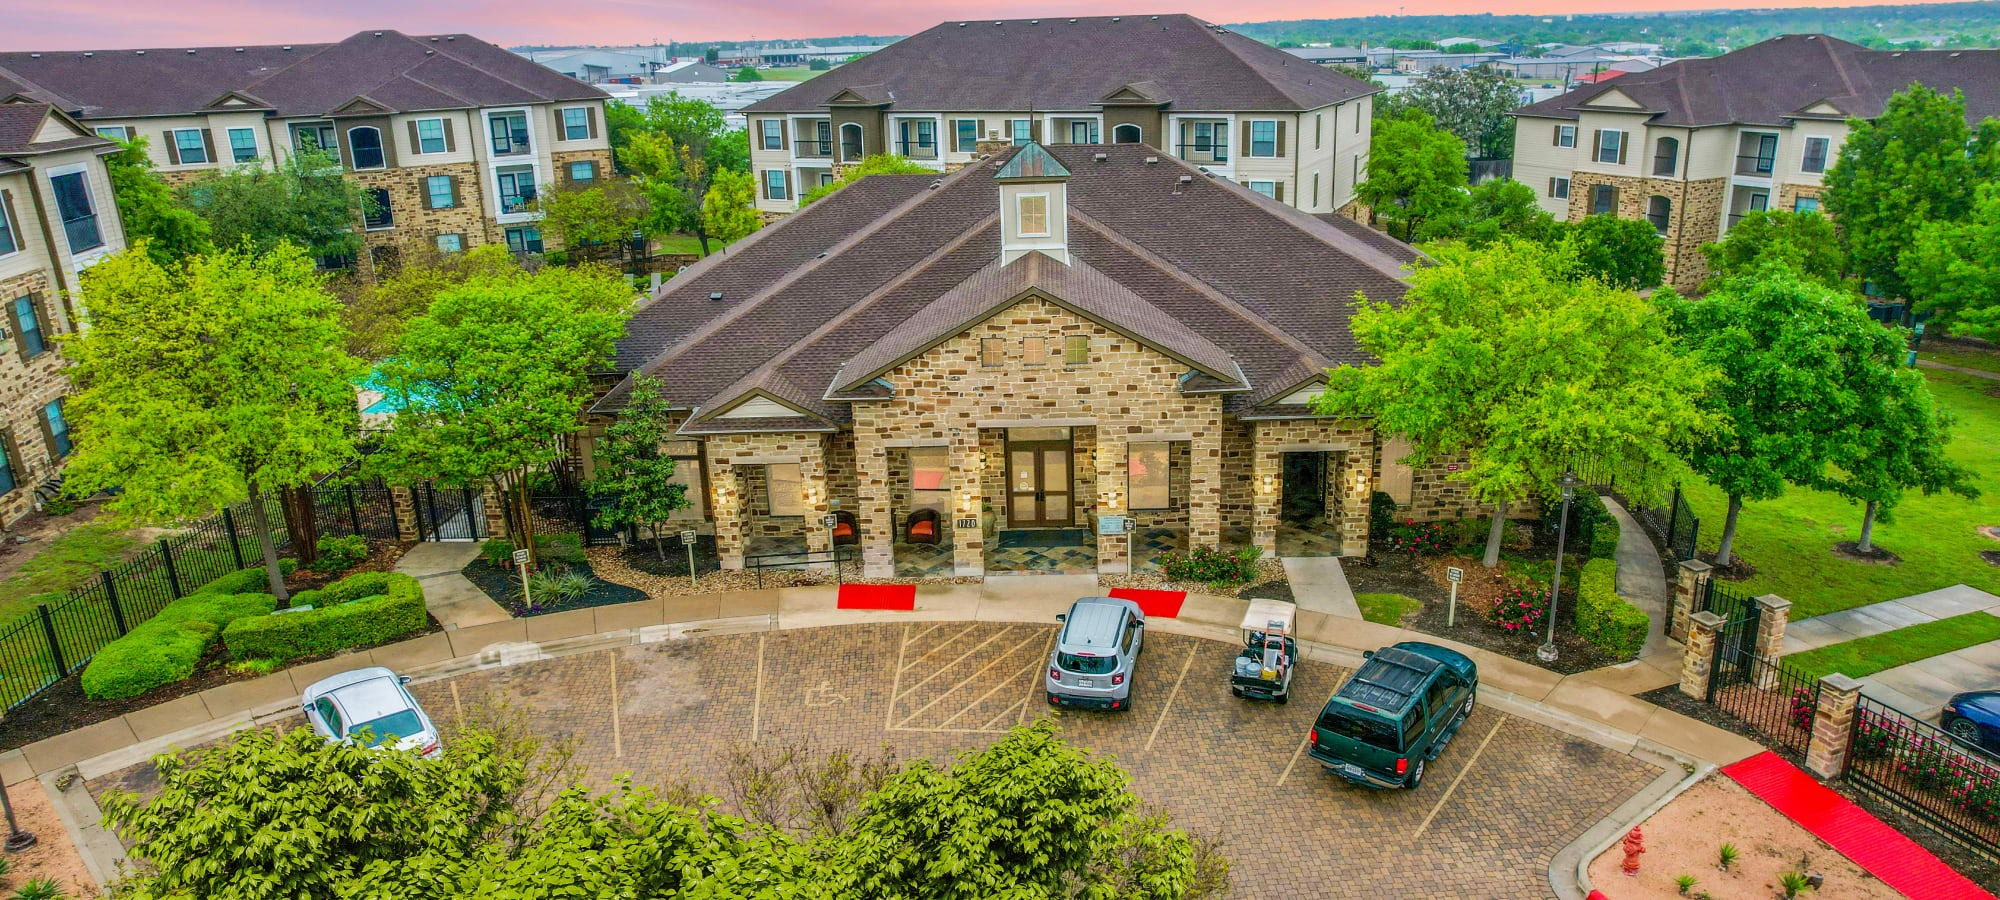 Apartments from Broadstone Grand Avenue in Pflugerville, Texas